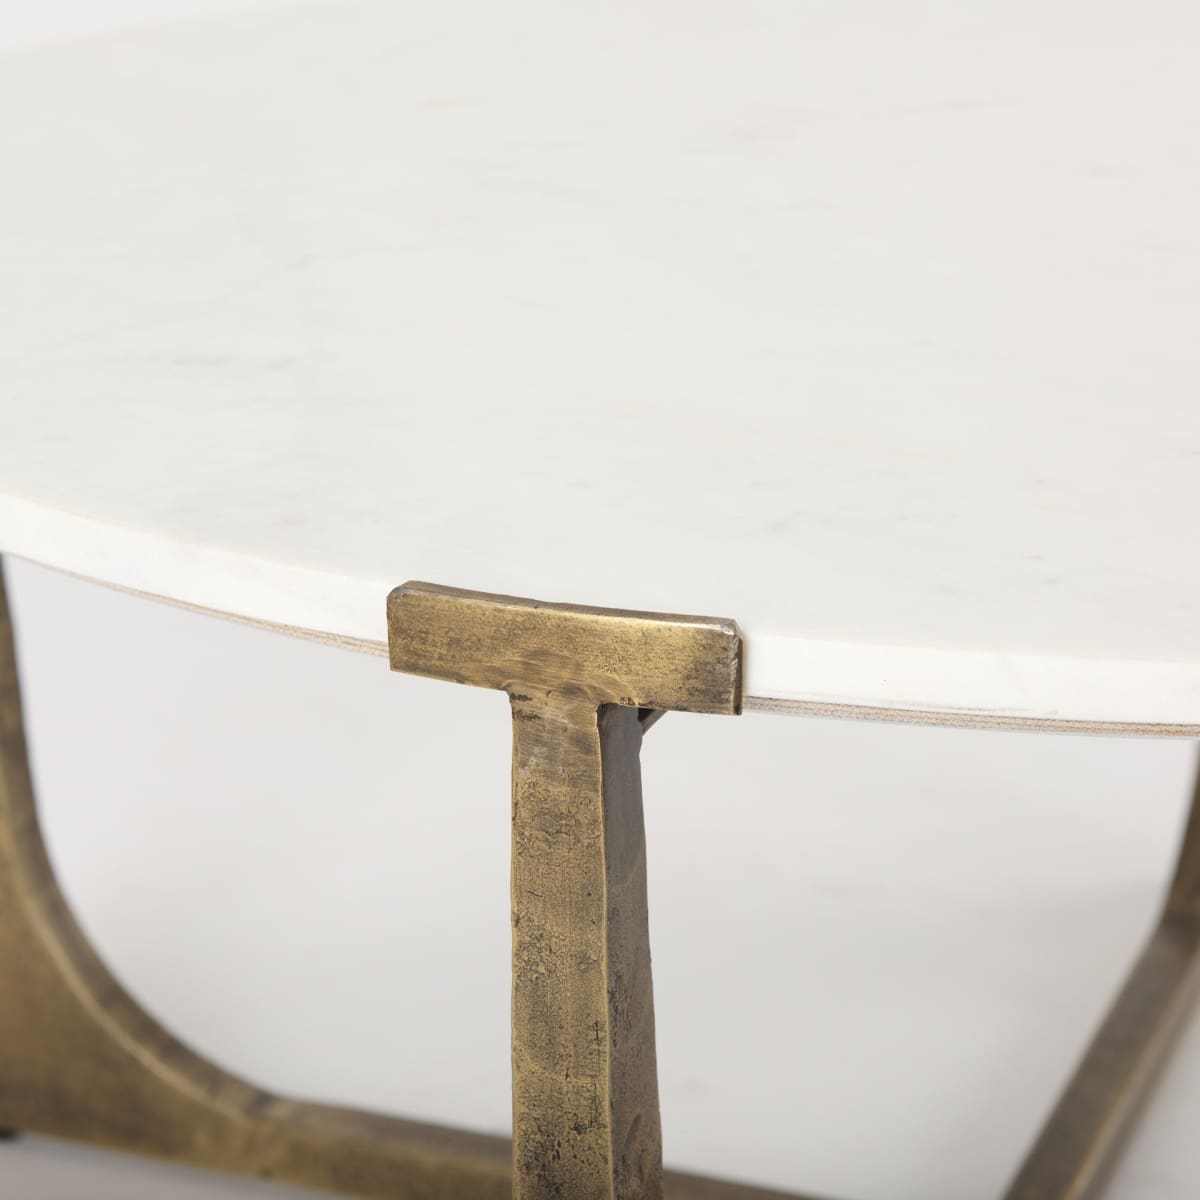 Atticus Coffee Table White Marble | Antiqued Gold Hammered Metal - coffee-tables